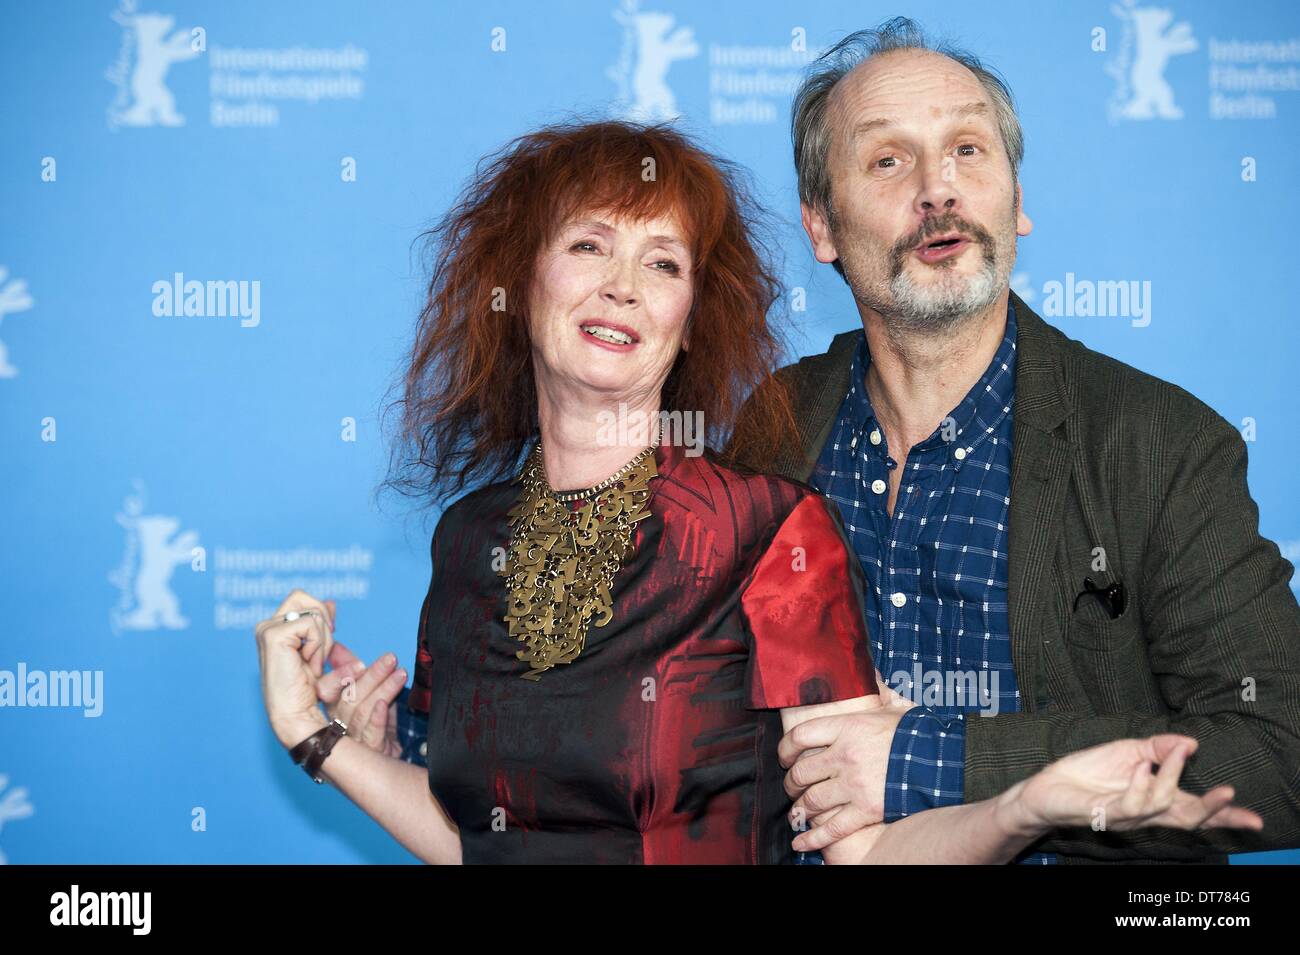 Berlin, Germany. 10th Feb, 2014. (L-R) Sabine Azema and Hippolyte Girardot attend the 'Life of Riley' (Aimer, boire et chanter) photocall during 64th Berlinale International Film Festival at Berlinale Palast on February 10, 2014 in Berlin, Germany. © Goncalo Silva/NurPhoto/ZUMAPRESS.com/Alamy Live News Stock Photo